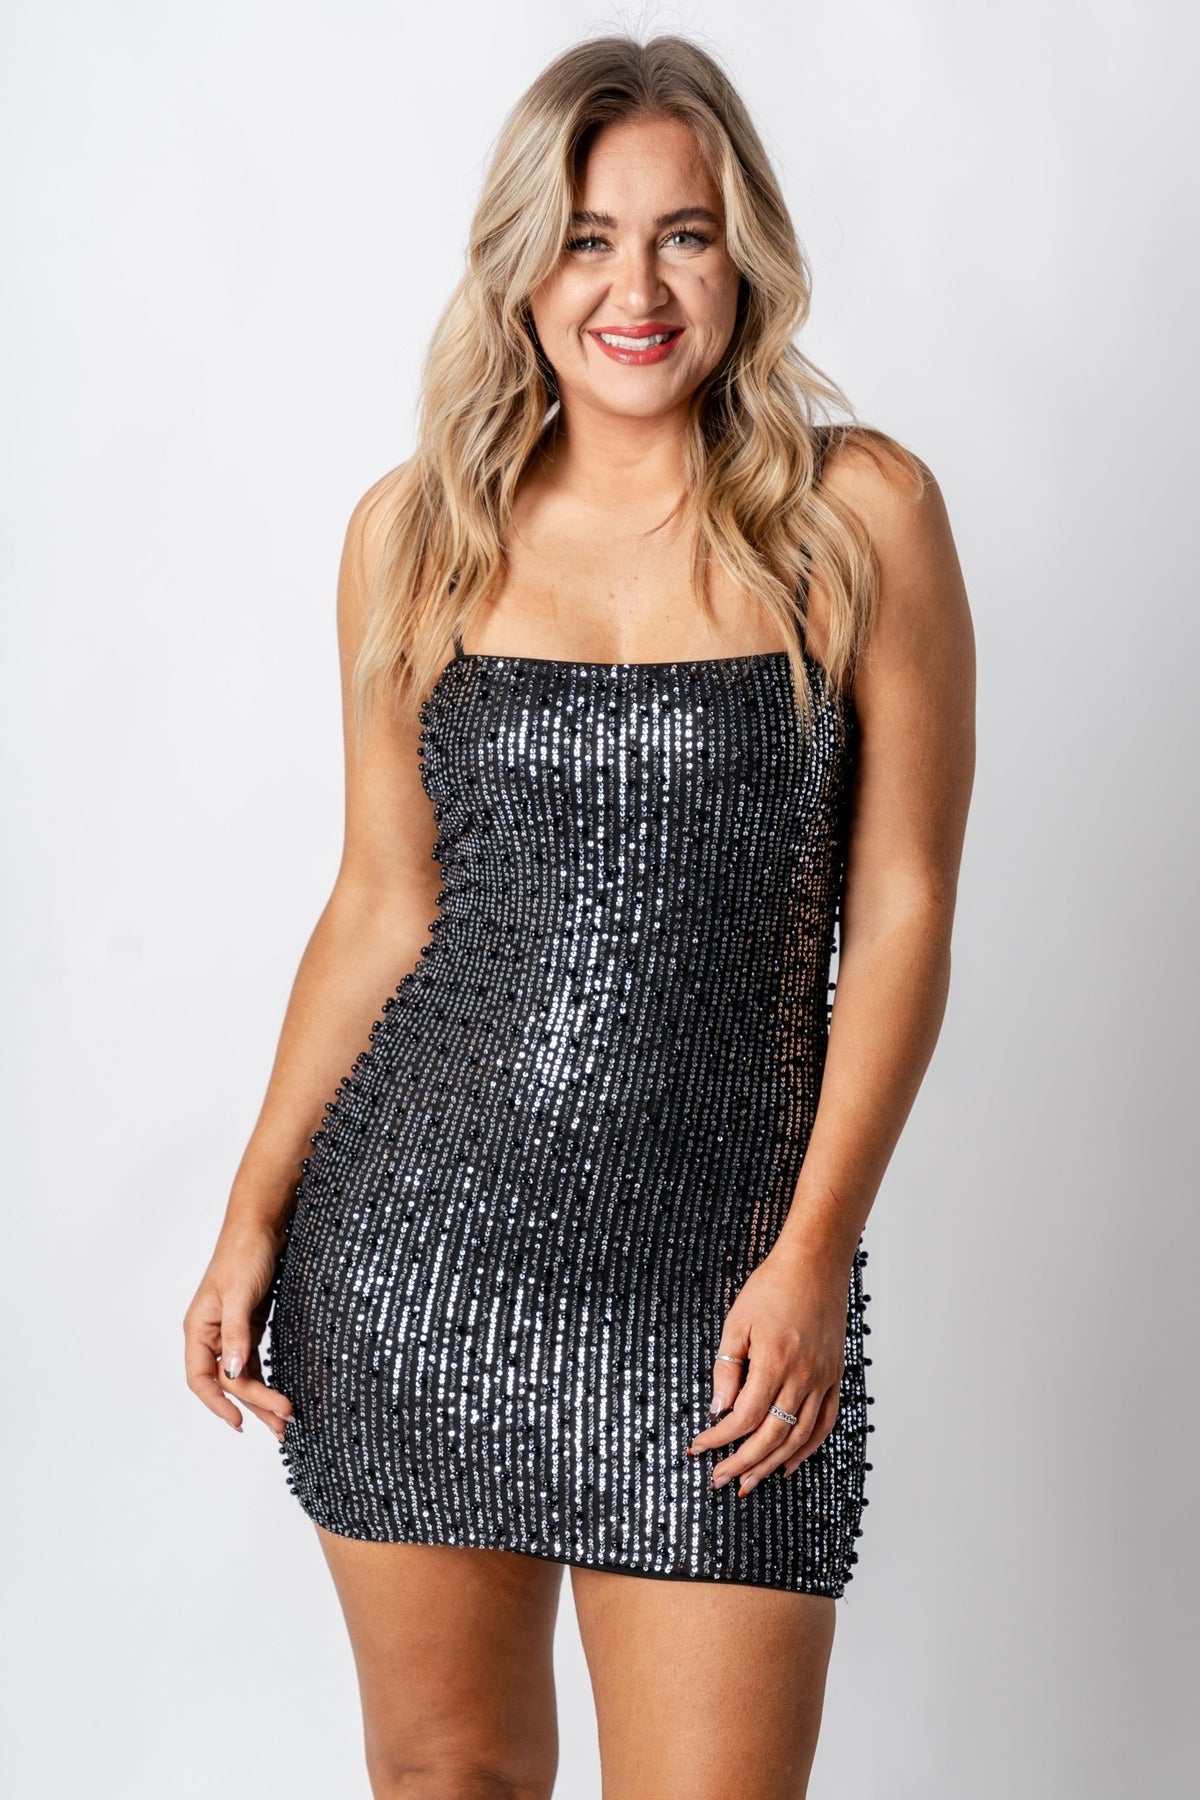 Sequin mini dress black - Trendy New Year's Eve Outfits at Lush Fashion Lounge Boutique in Oklahoma City